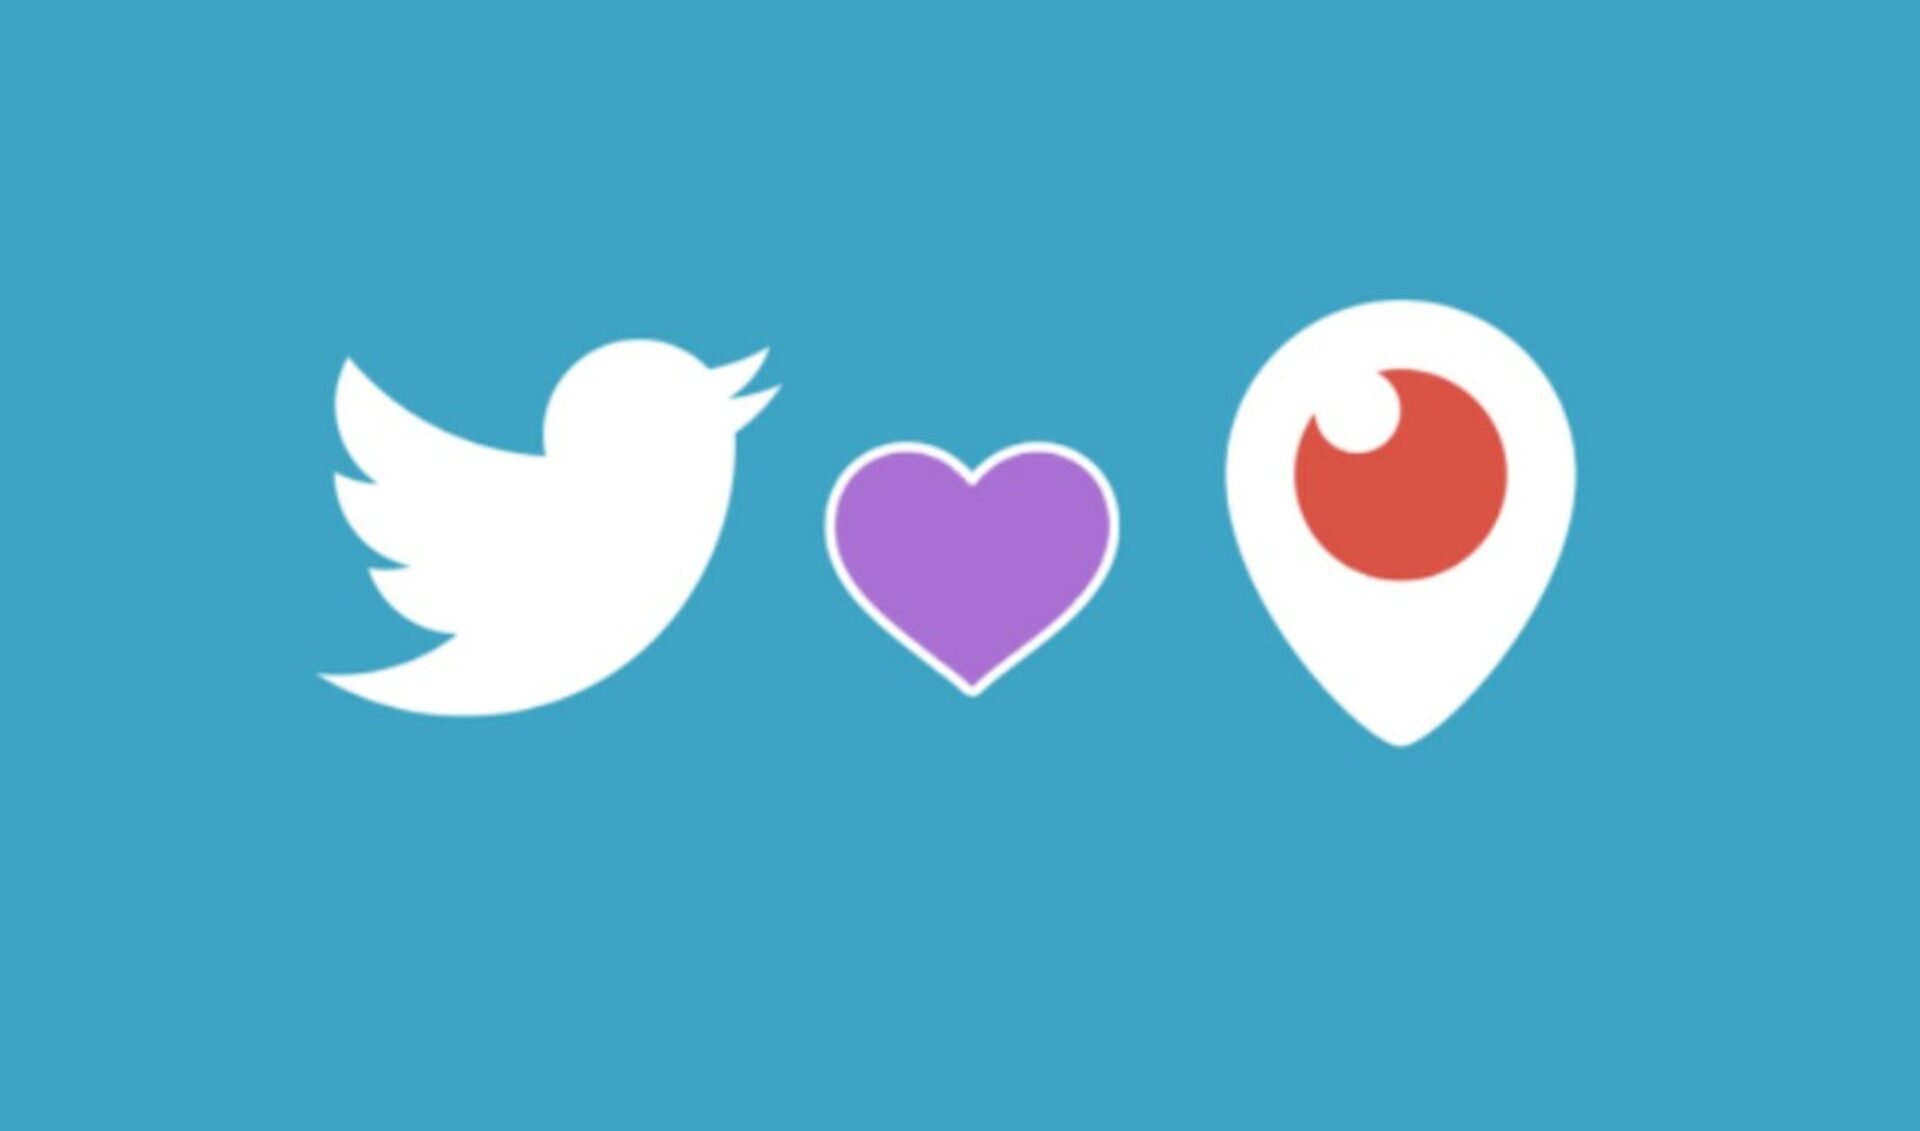 Twitter To Sunset Periscope App In March After Years Of Declining Usage